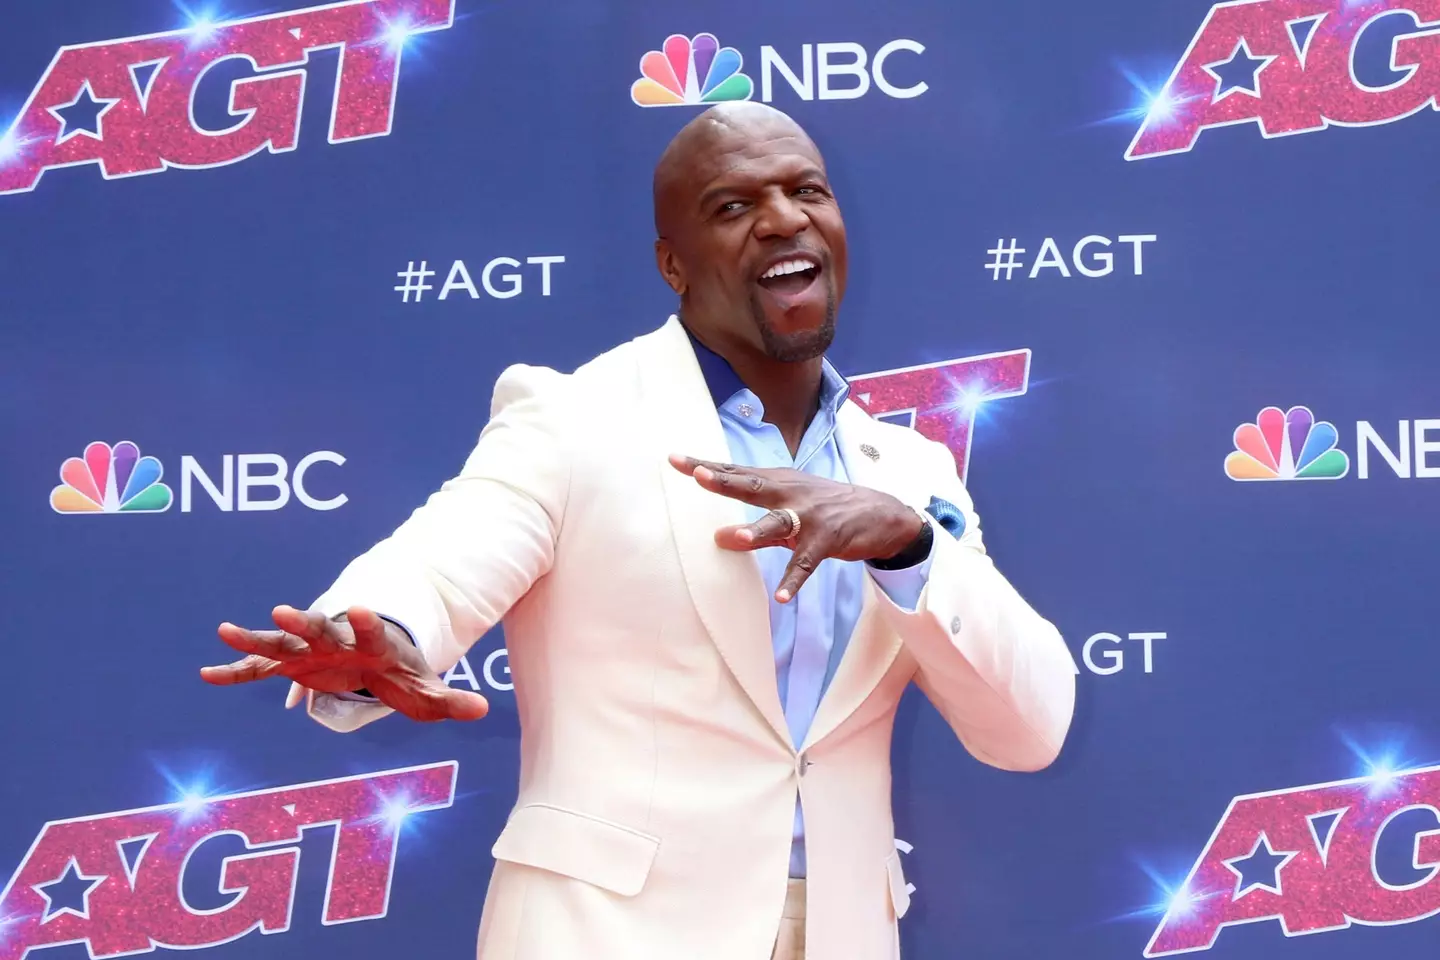 Terry Crews said his posts about Black Lives Matter were a 'mistake'.